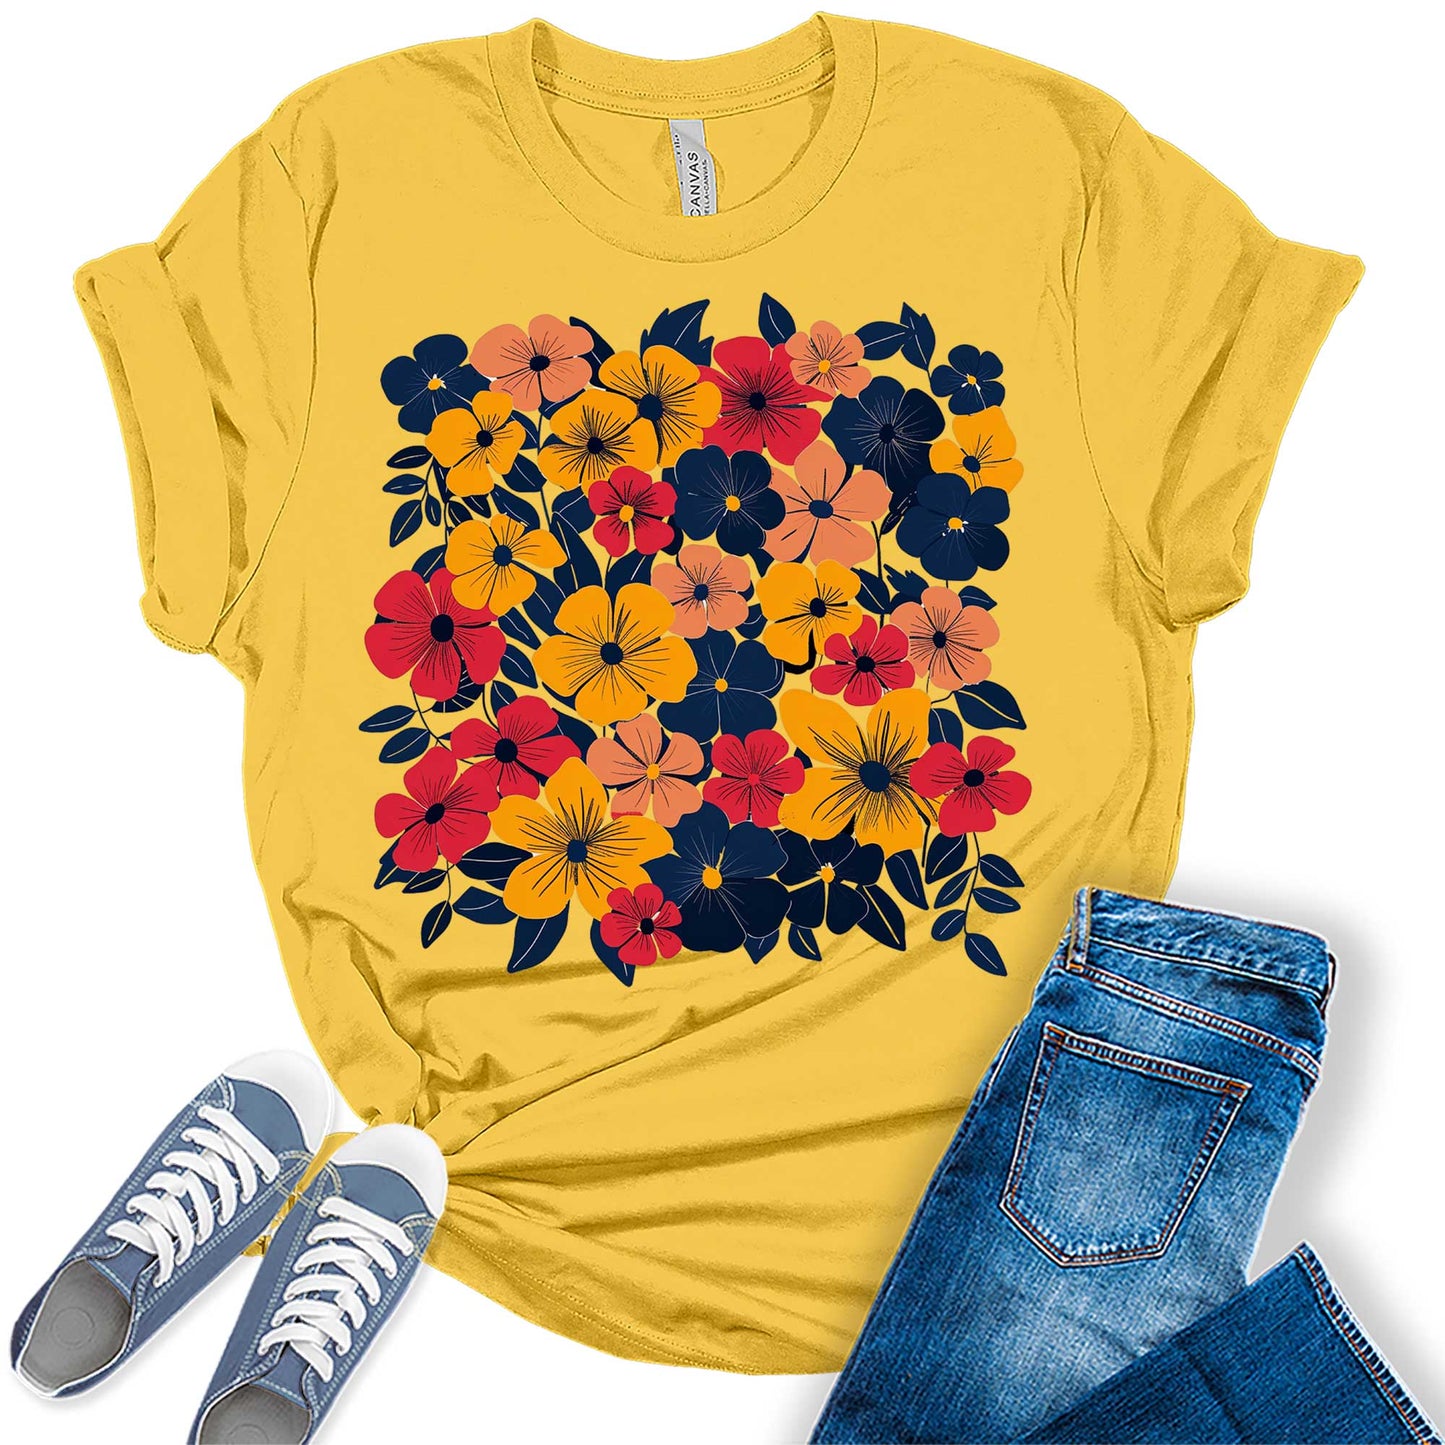 Floral Wildflower Shirt Vintage Boho Graphic Tees for Women Trendy Plus Size Summer Tops